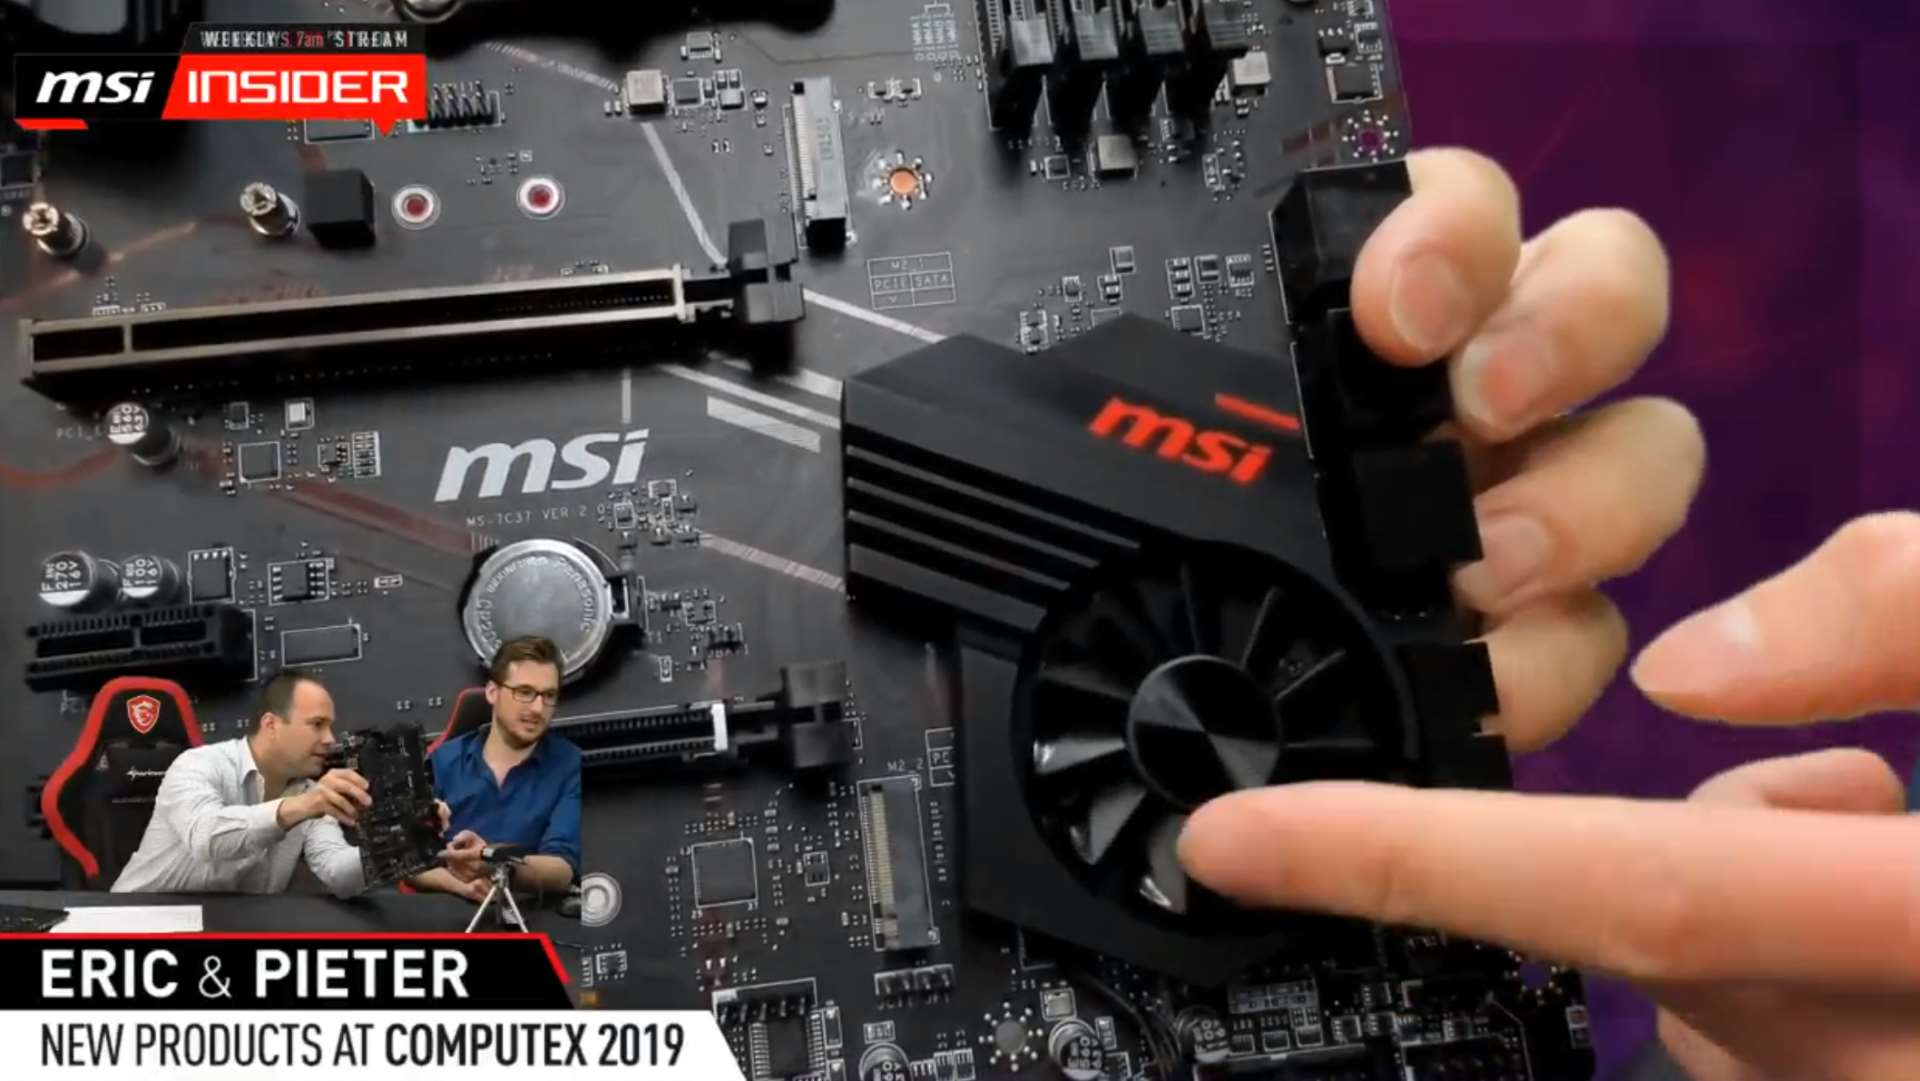 MSI on X570 chipset fan: “Of course nobody wants this, but much PCGamesN